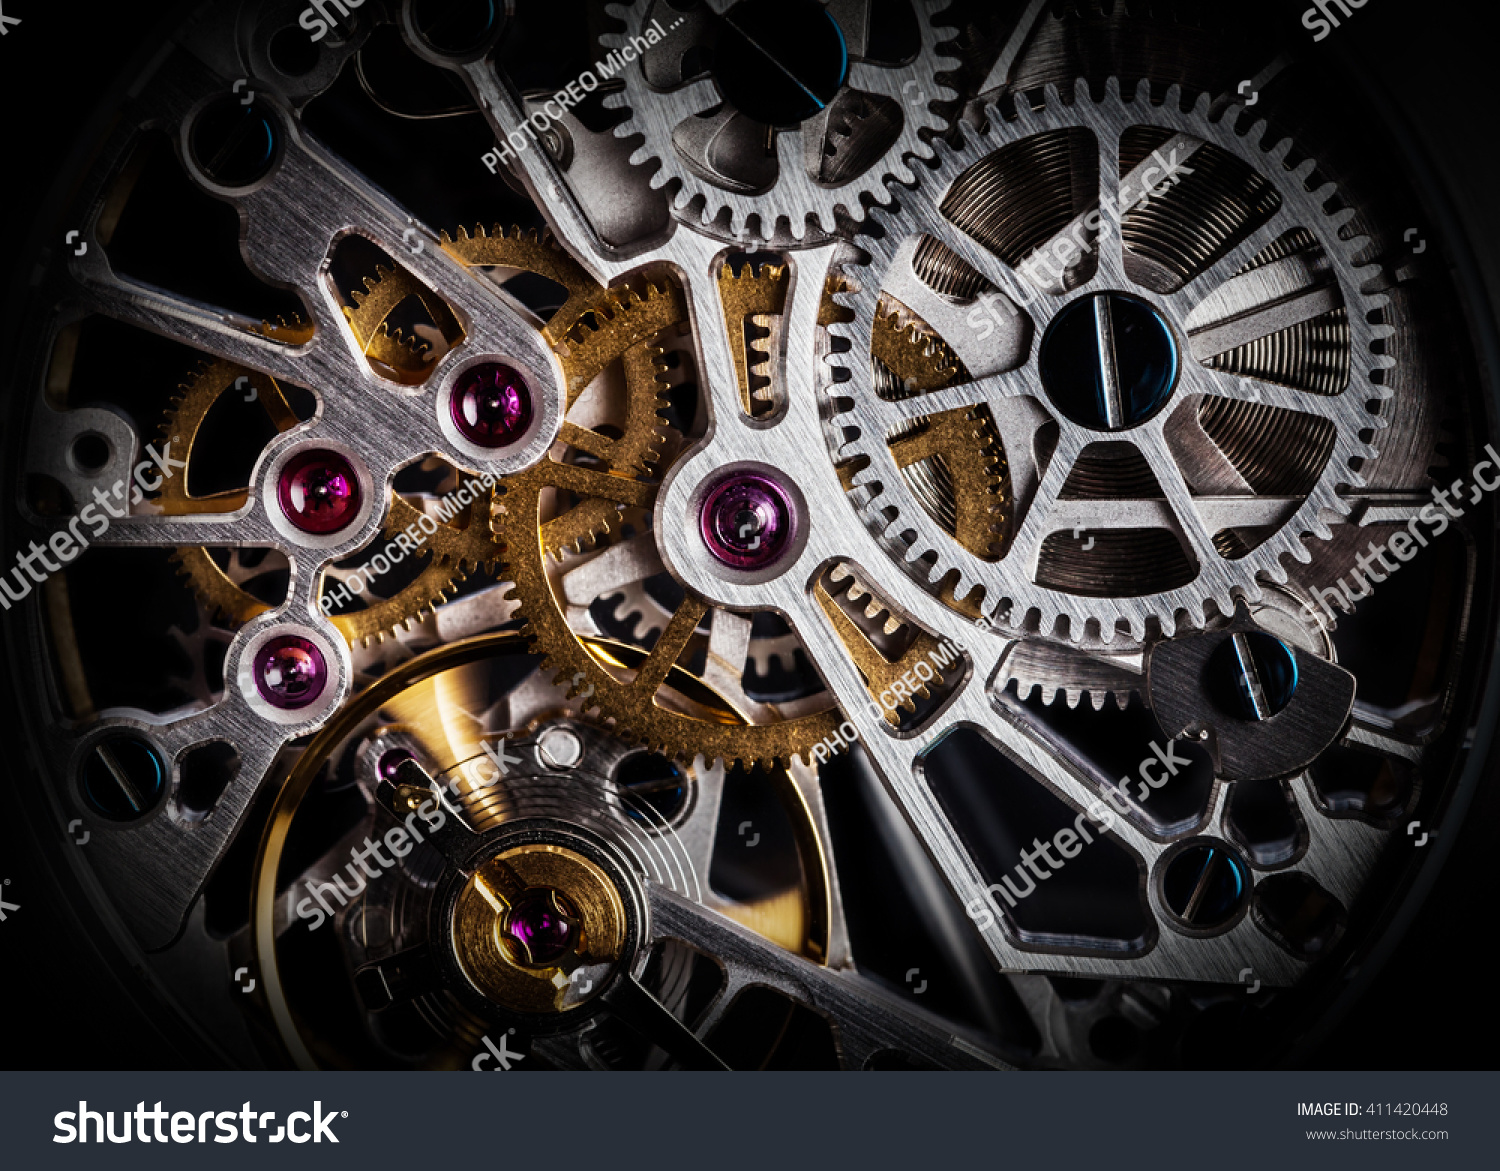 Mechanism, clockwork of a watch with jewels, close-up. Vintage luxury background. Time, work concept. #411420448